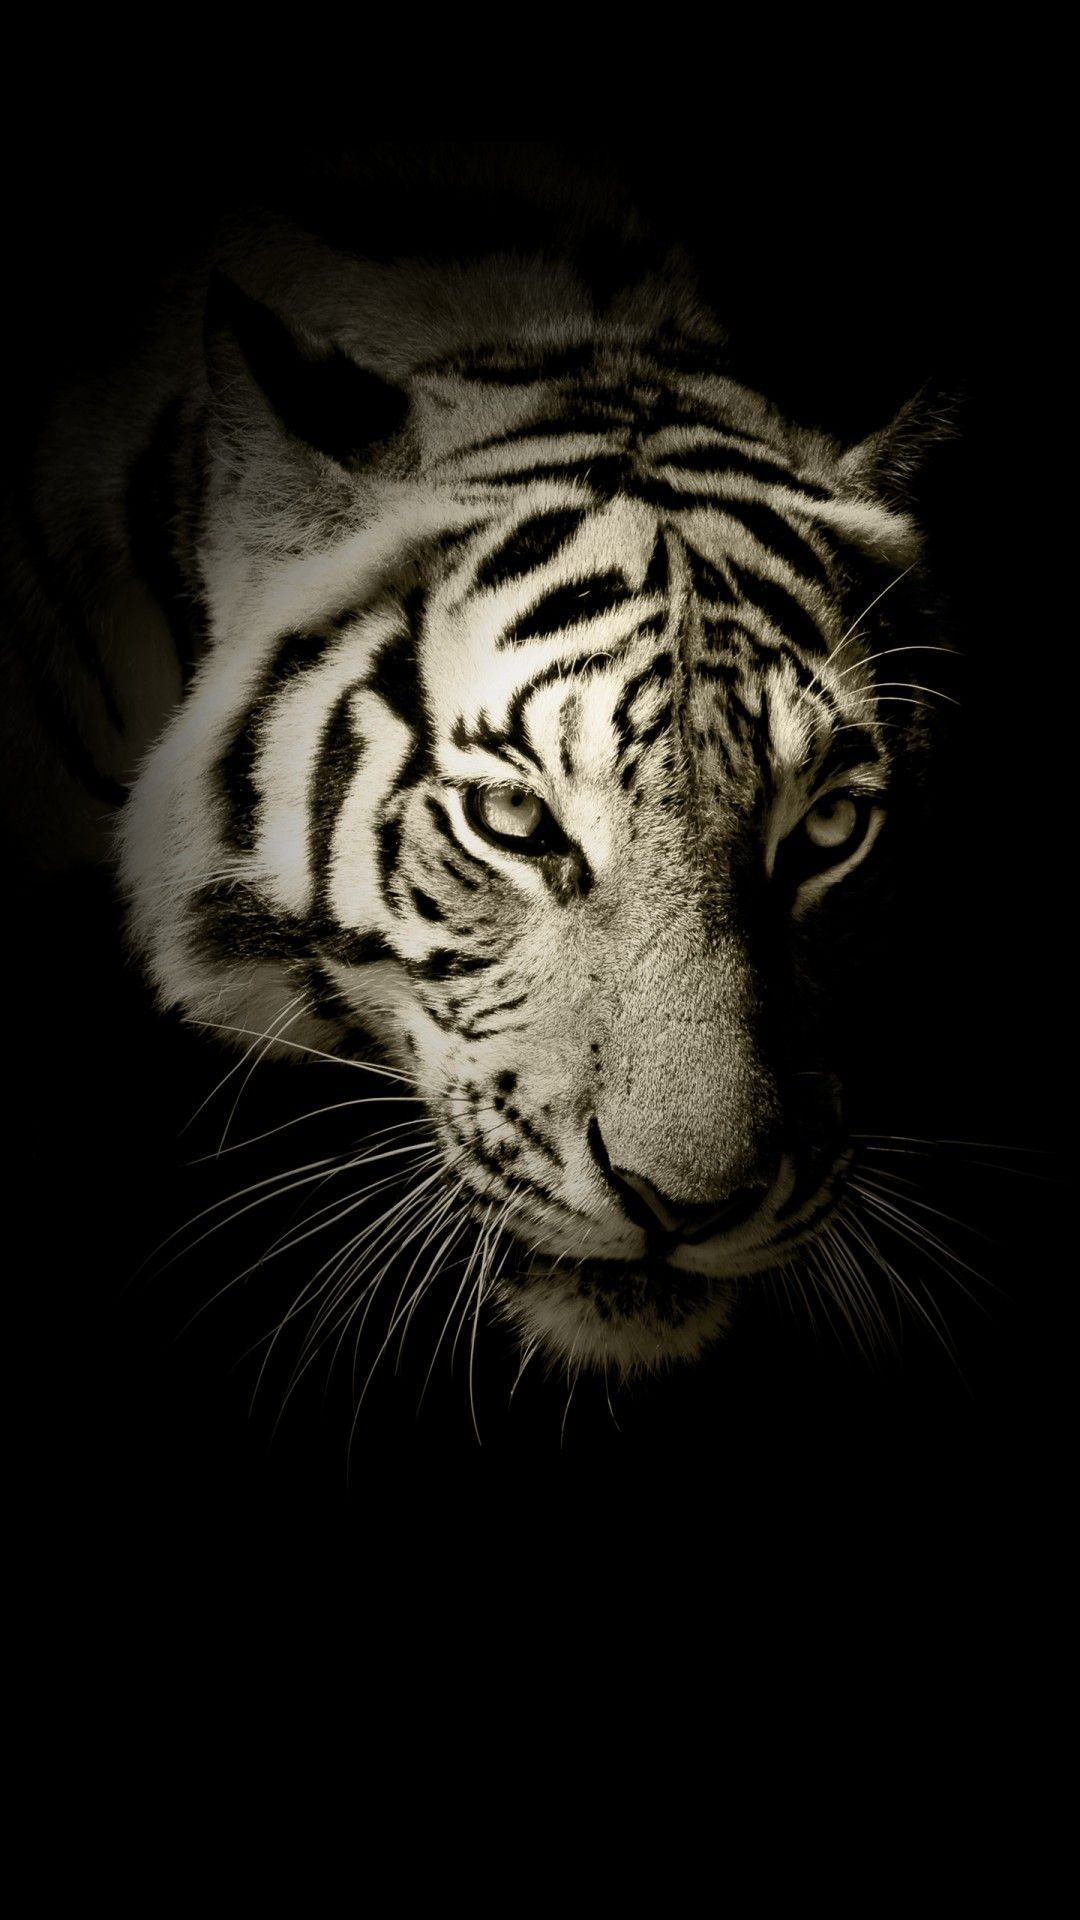 Black And White Tiger Phone Wallpaper. Tiger quotes, Animal wallpaper, Motivational quotes wallpaper